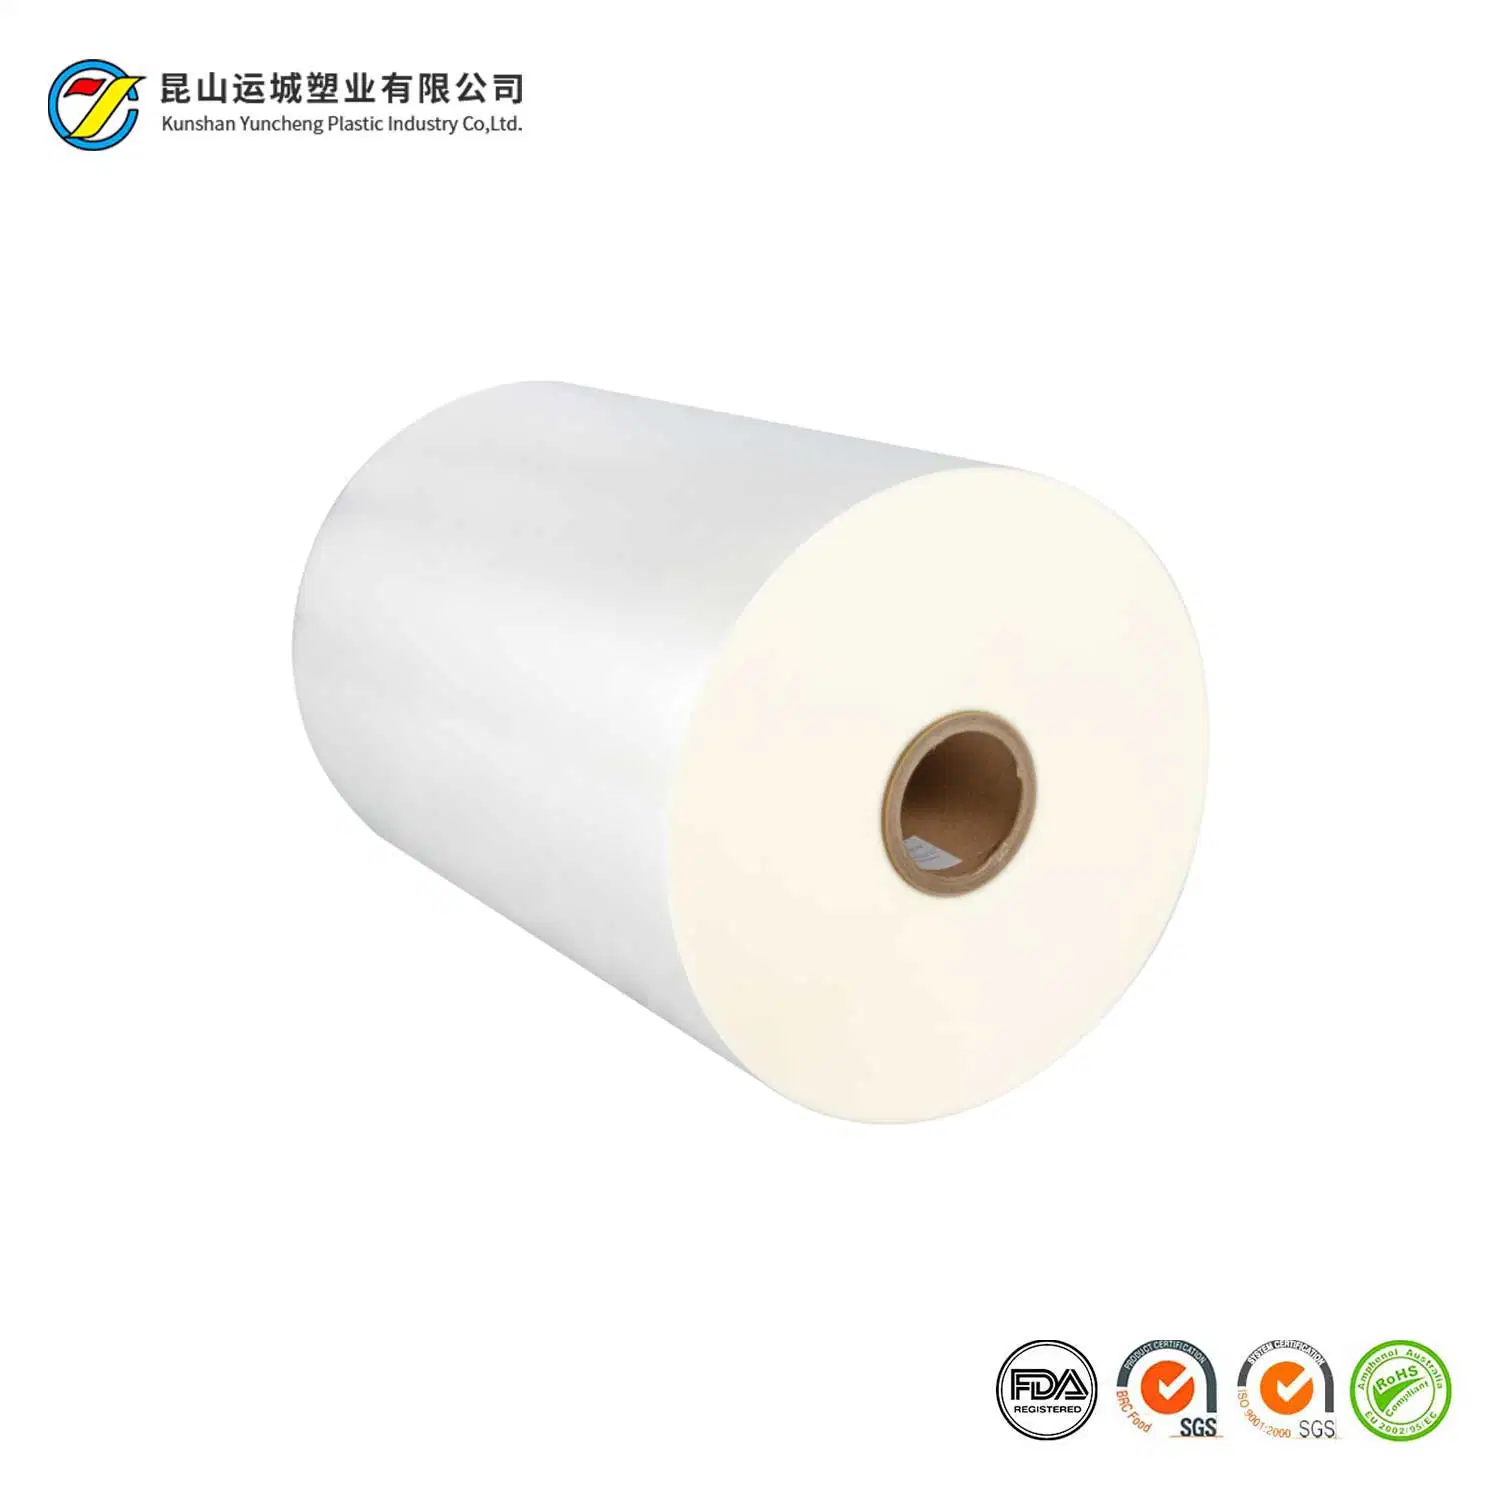 Plastic Packaging Material Manufacturers Nylon Film for Printing and Lamination